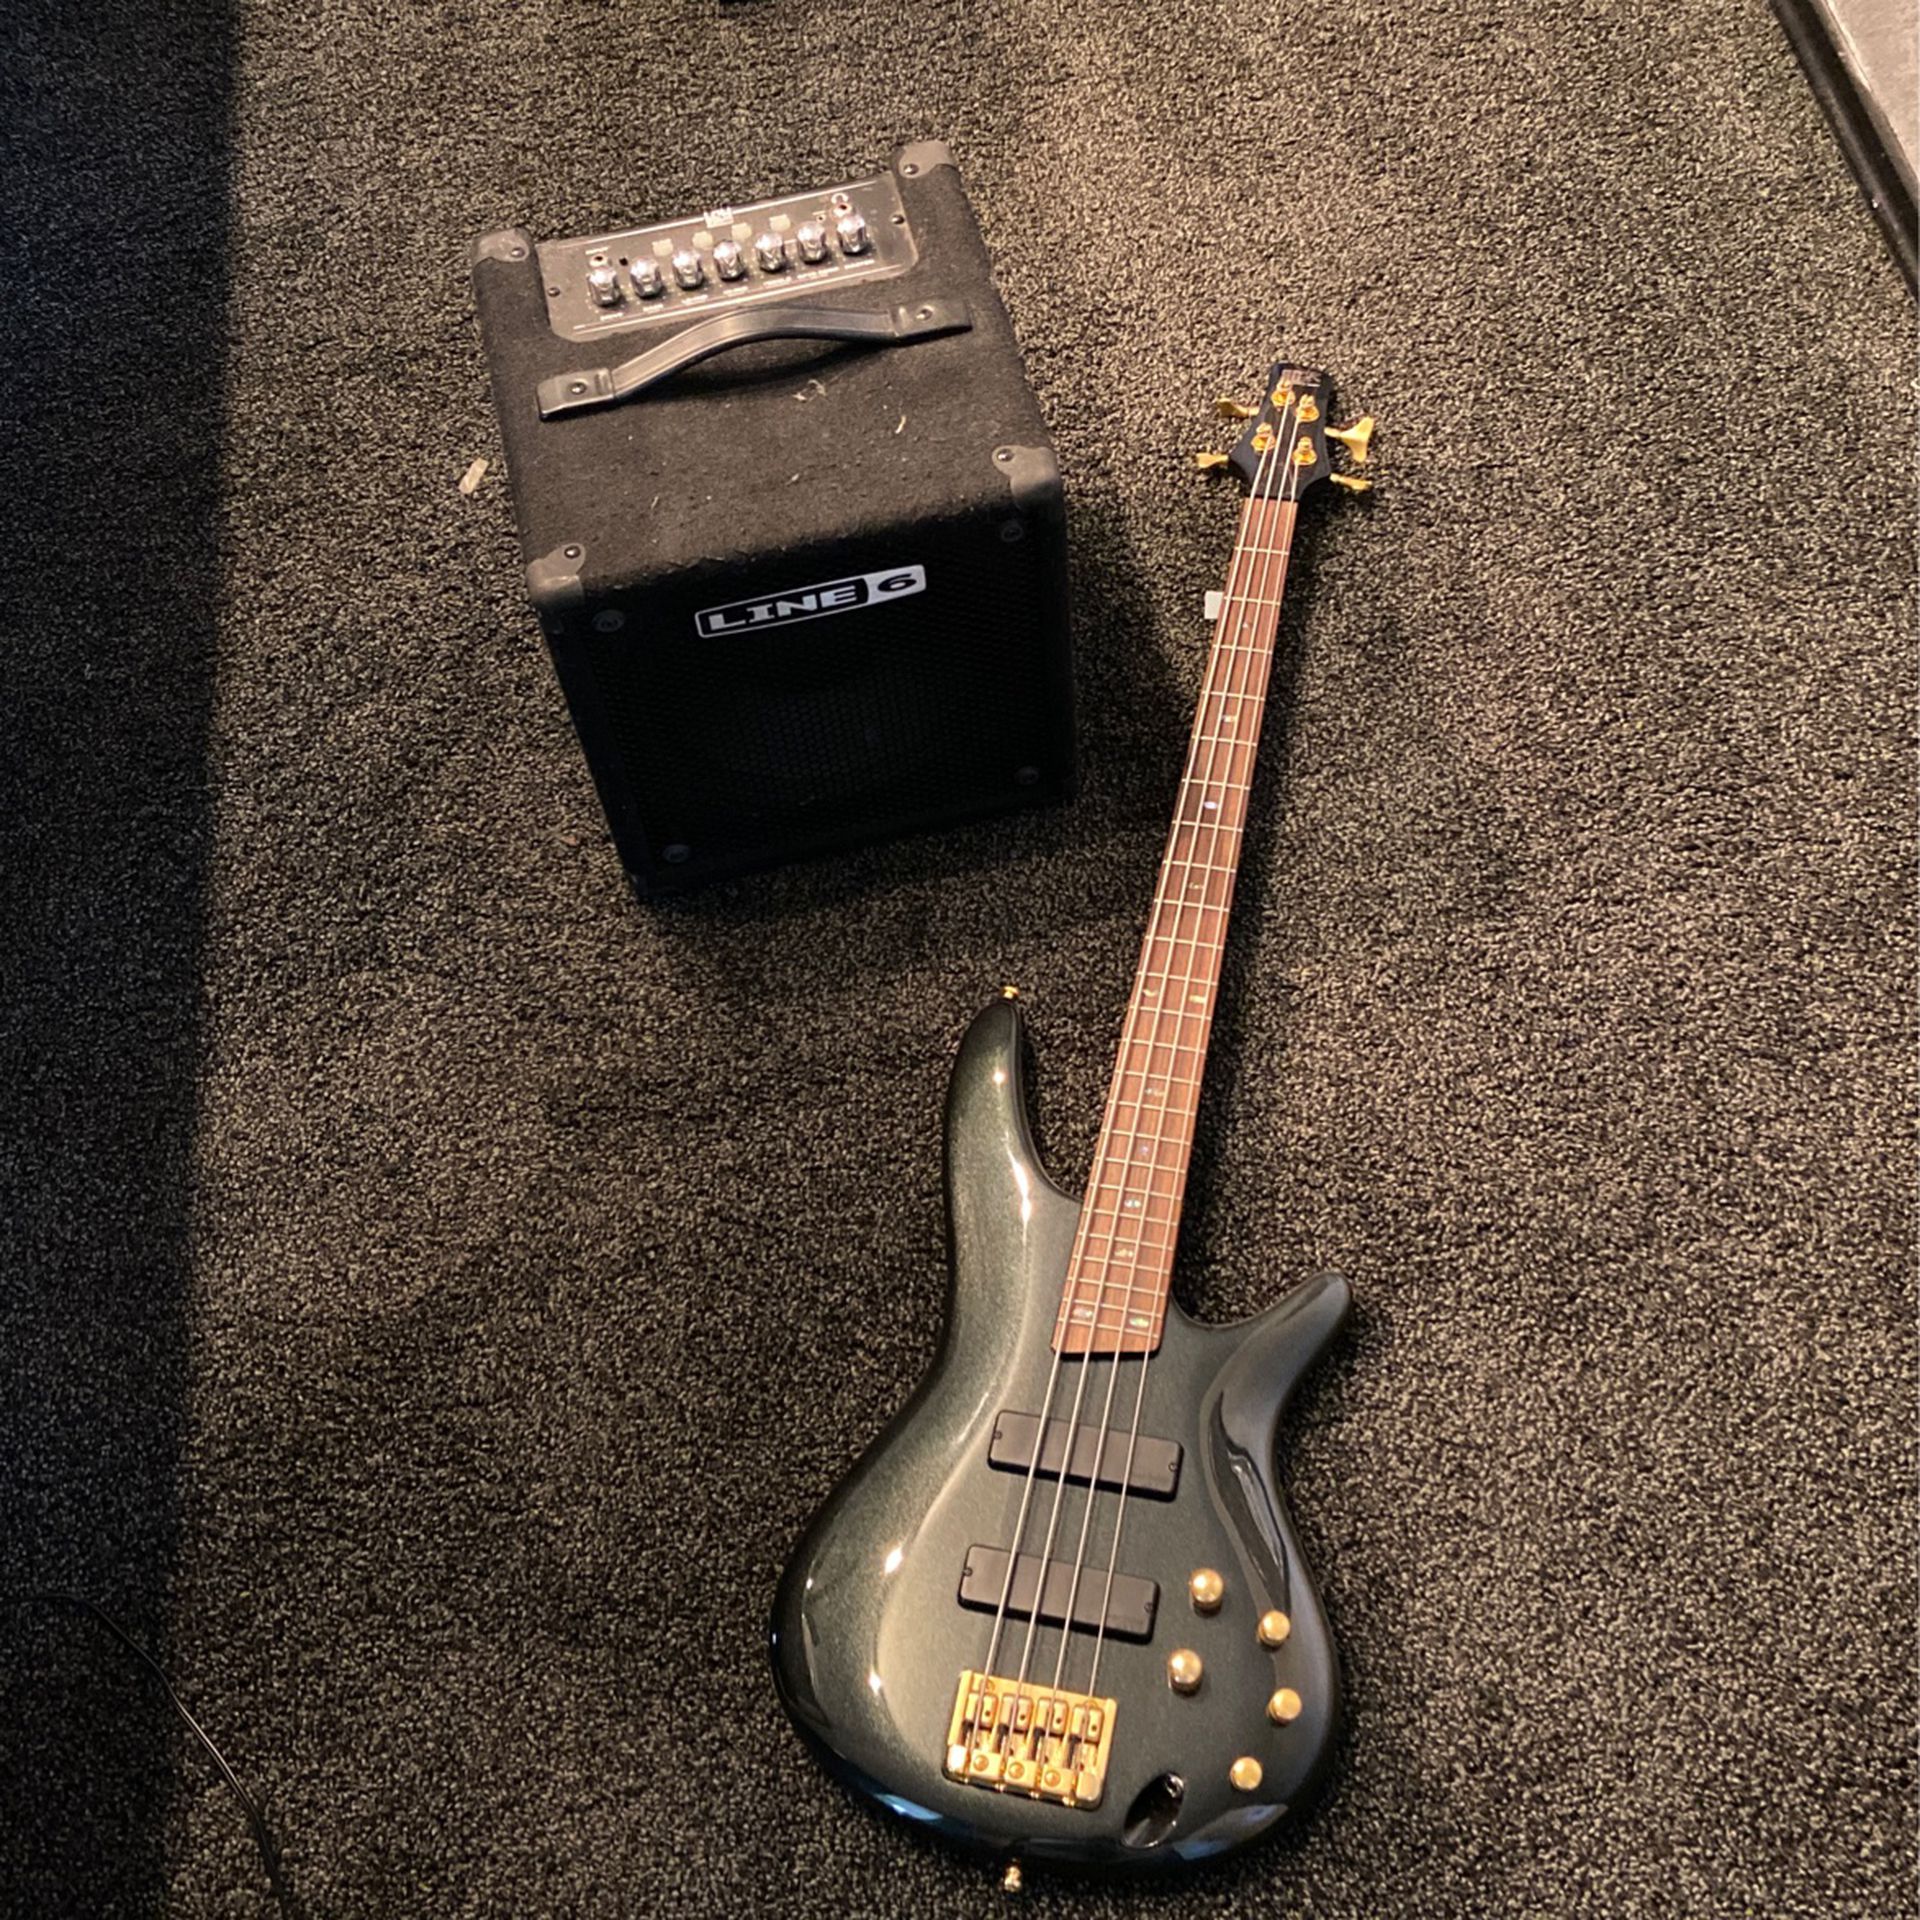 Ibanez Sound Gear Bass And Line 6 Amp